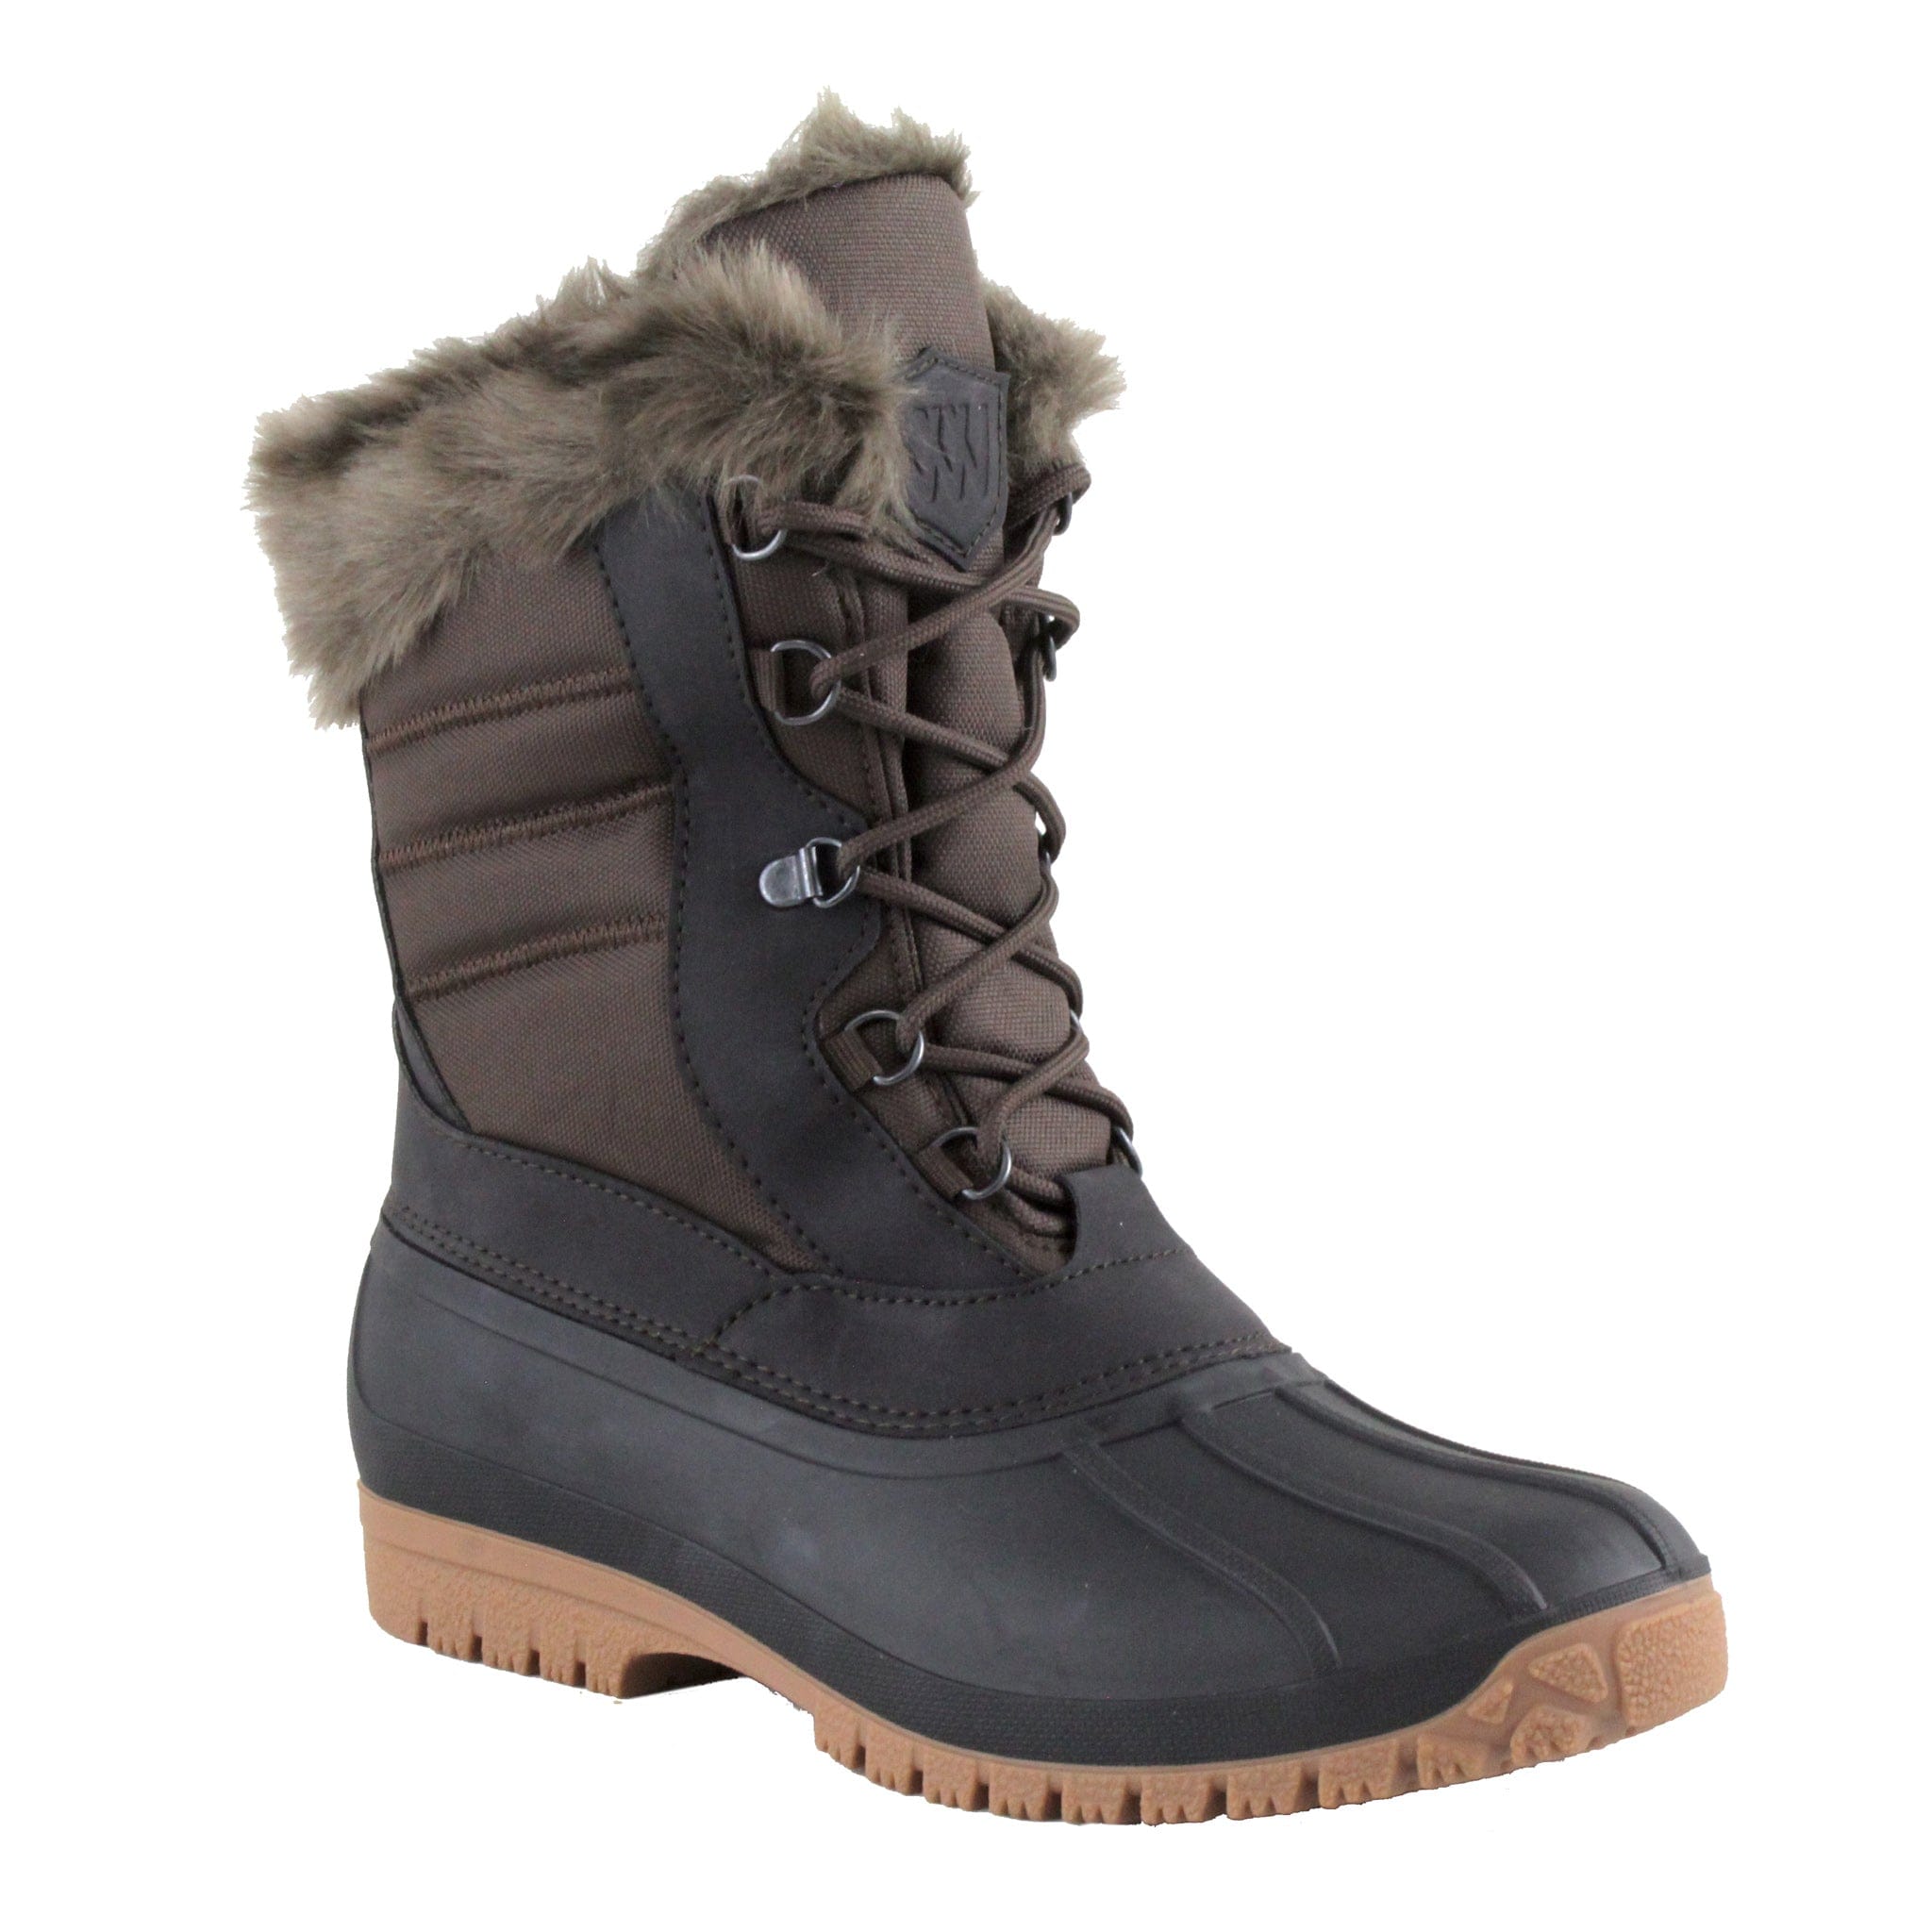 Woof Wear Mid Winter Boots WF0036 Black and Chocolate Brown